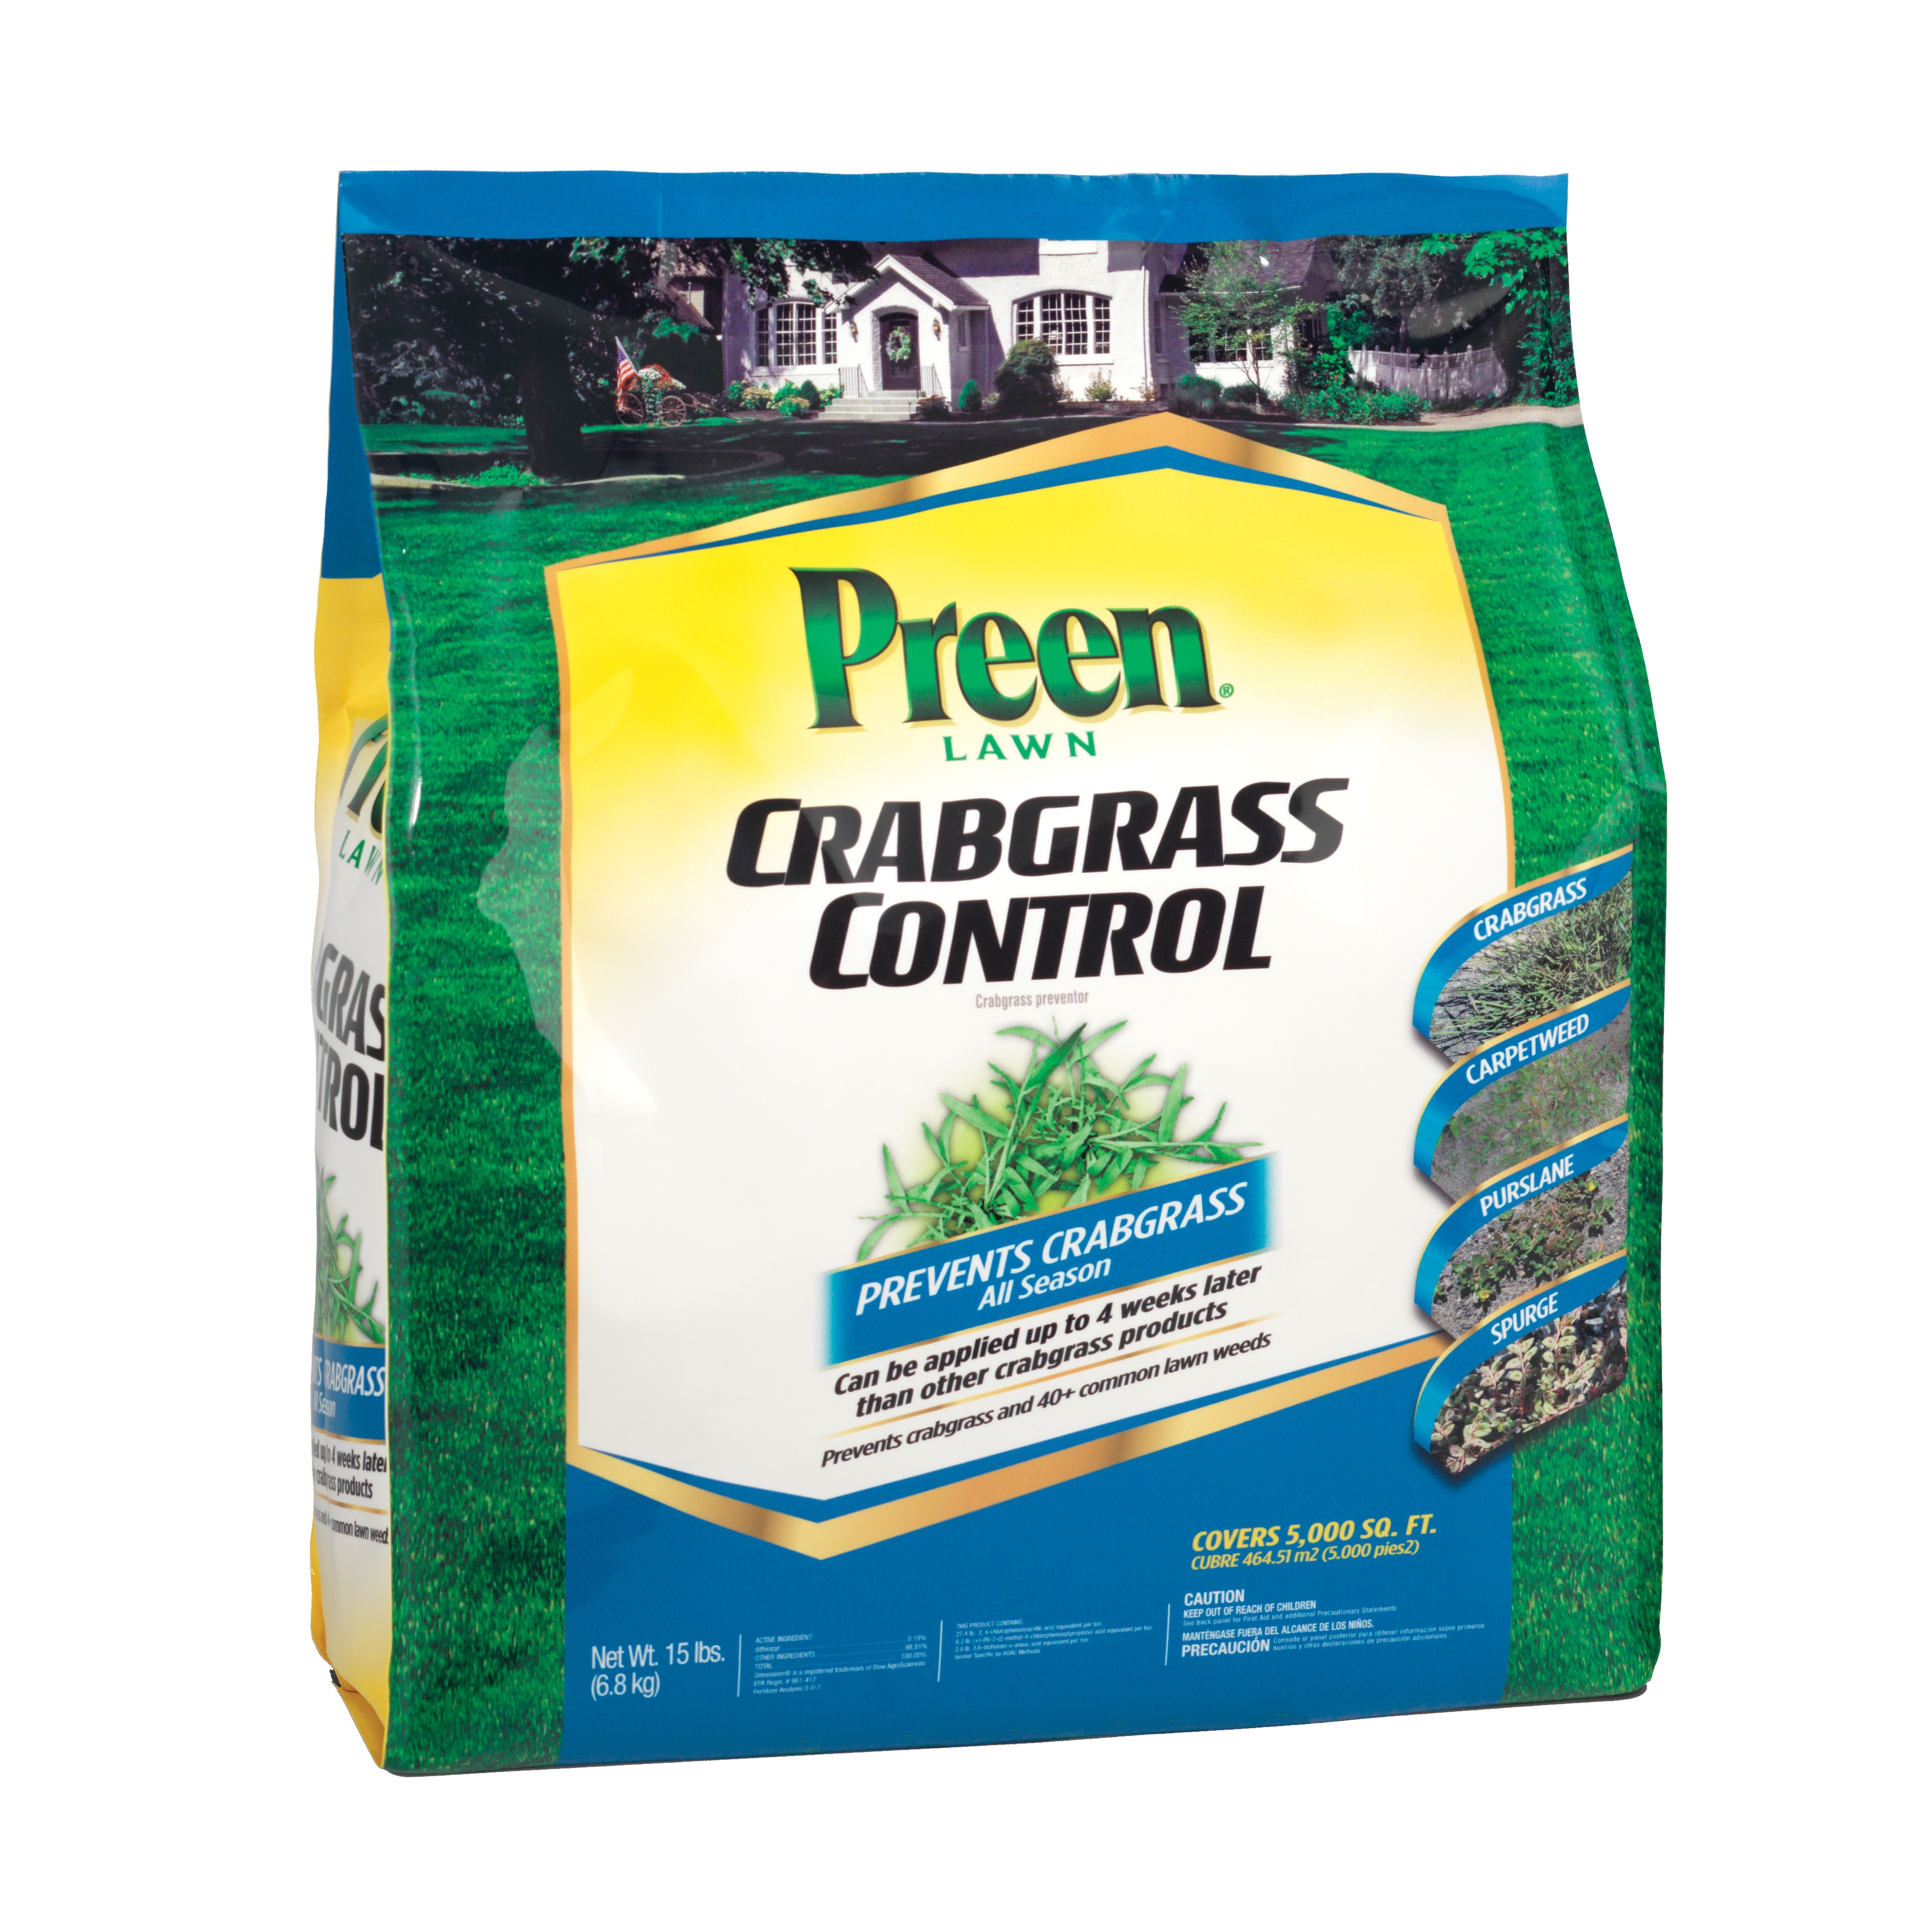 Image of Preen Crabgrass Preventer at Lowes